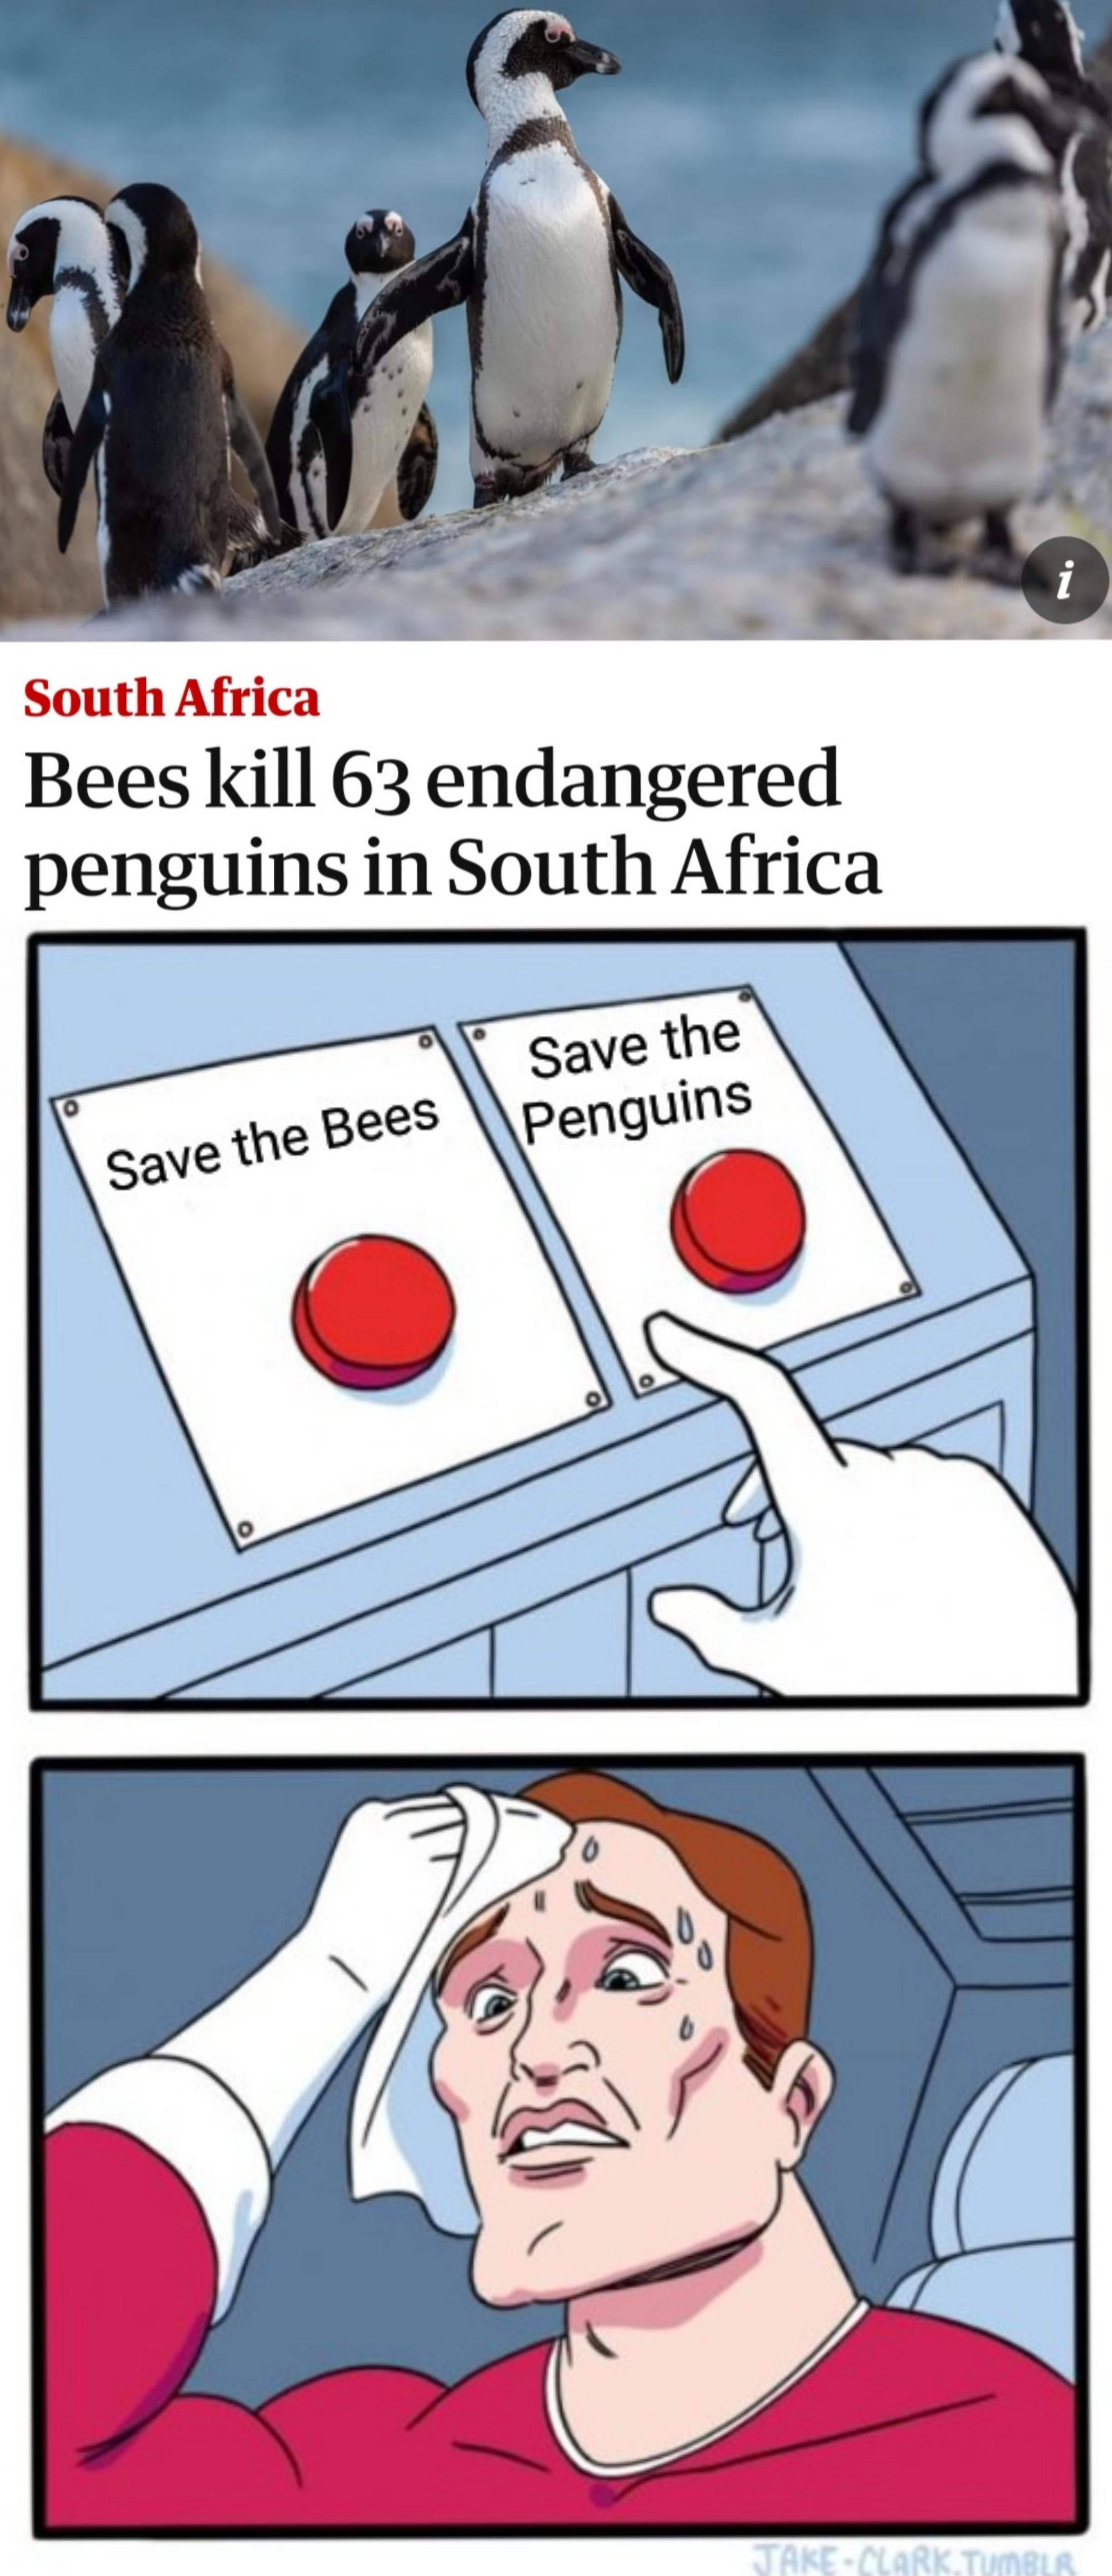 male stereotypes meme - South Africa Bees kill 63 endangered penguins in South Africa Save the Penguins Save the Bees